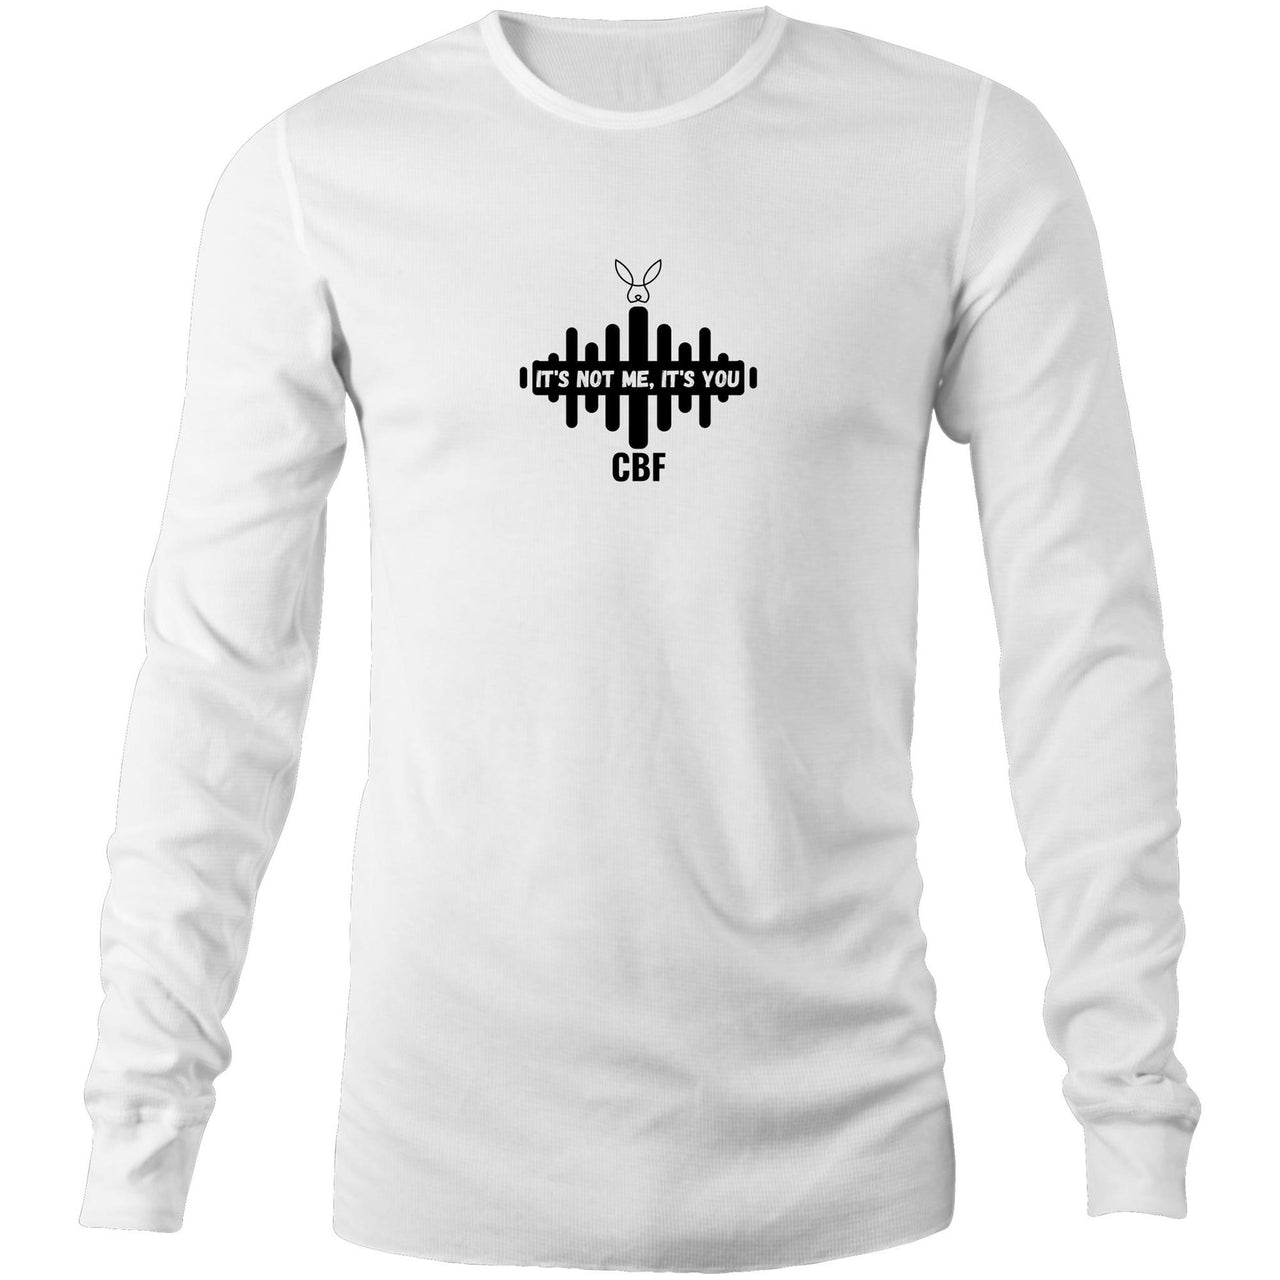 Not me It's You Long Sleeve T-Shirt by CBF Clothing in White